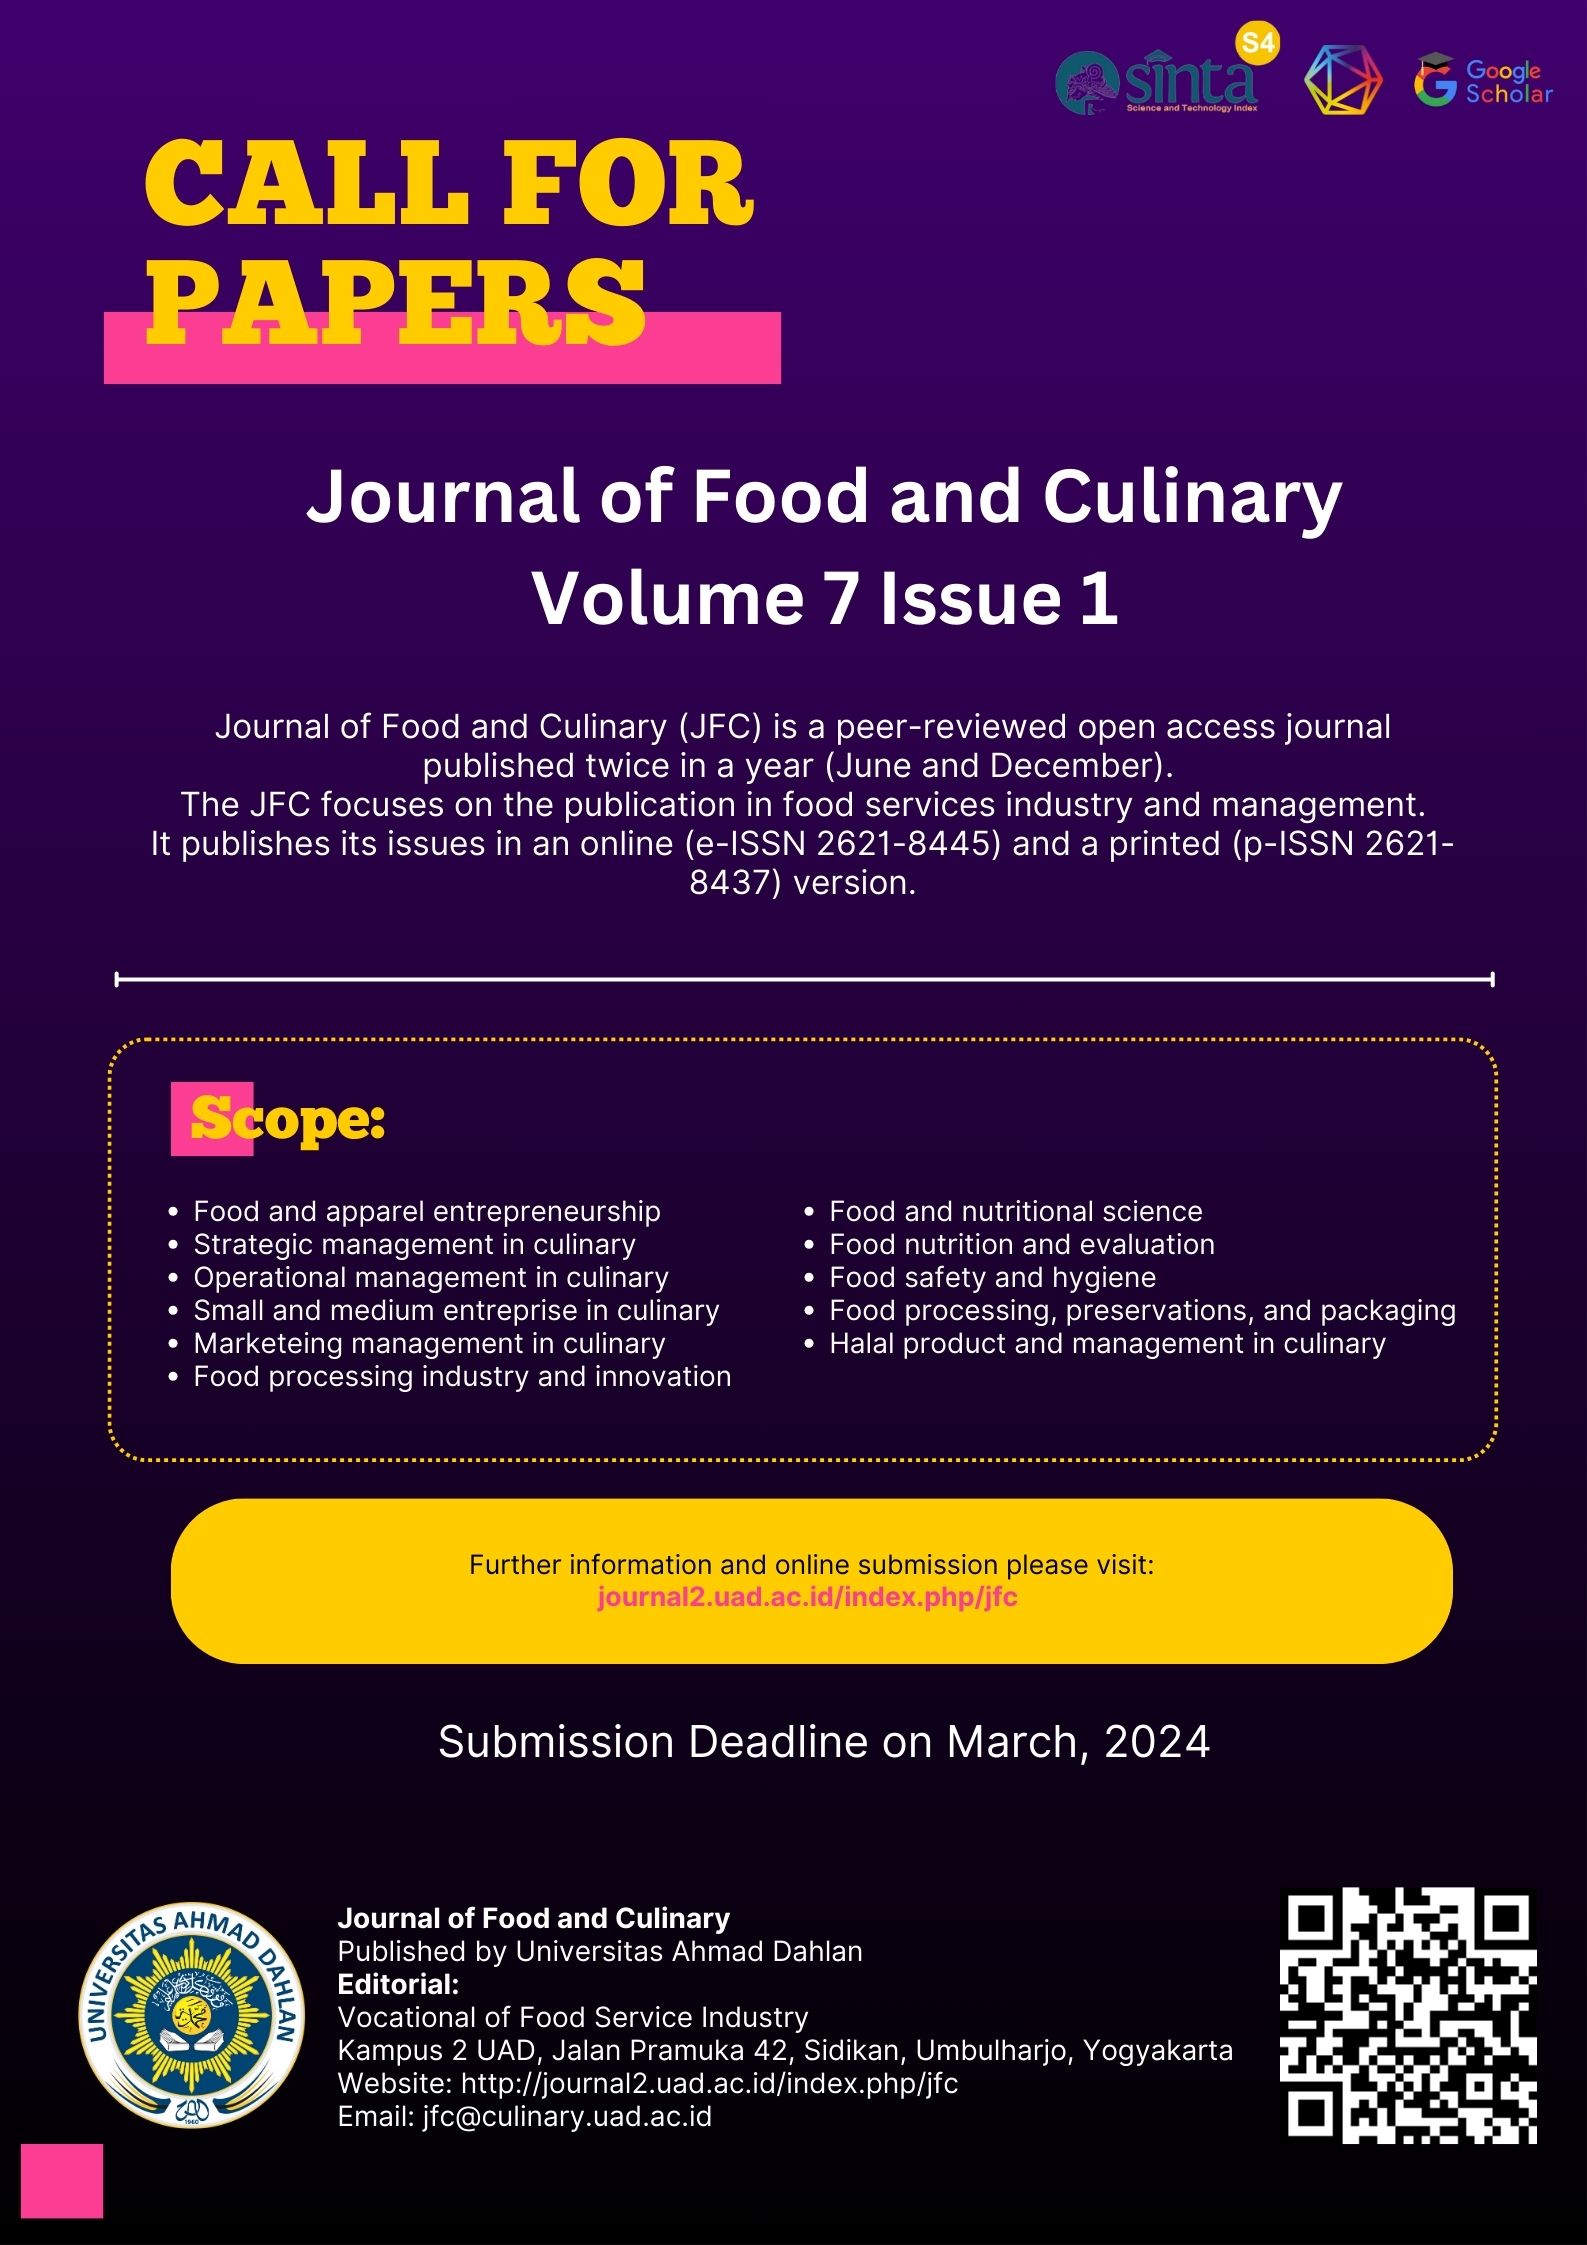 Call for Papers (vol 7 issues 1)